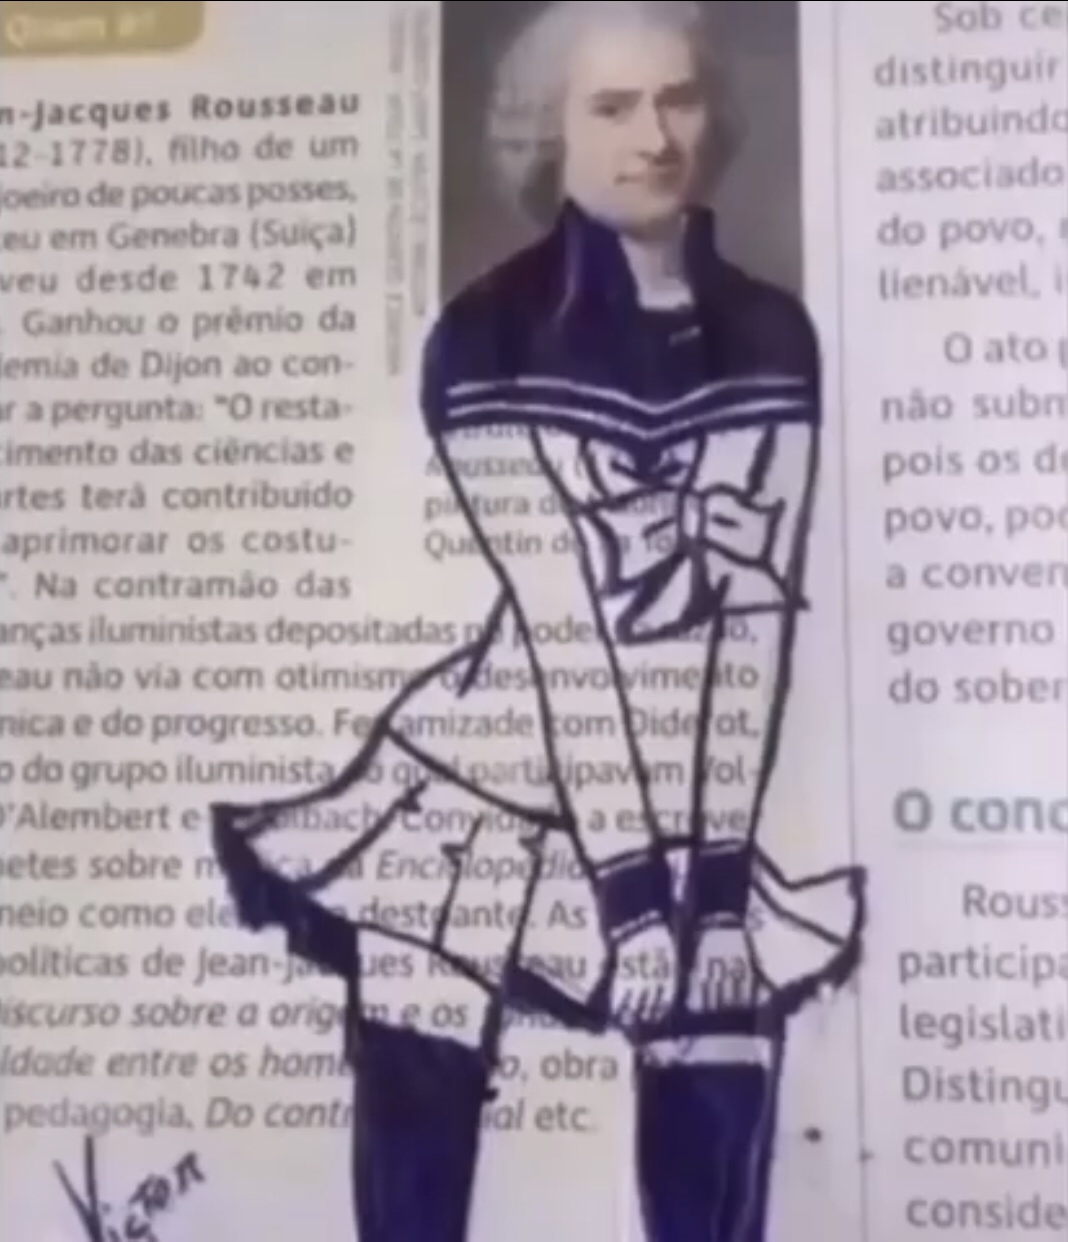 blursed history sailor moon drawing on historical figure in textbook